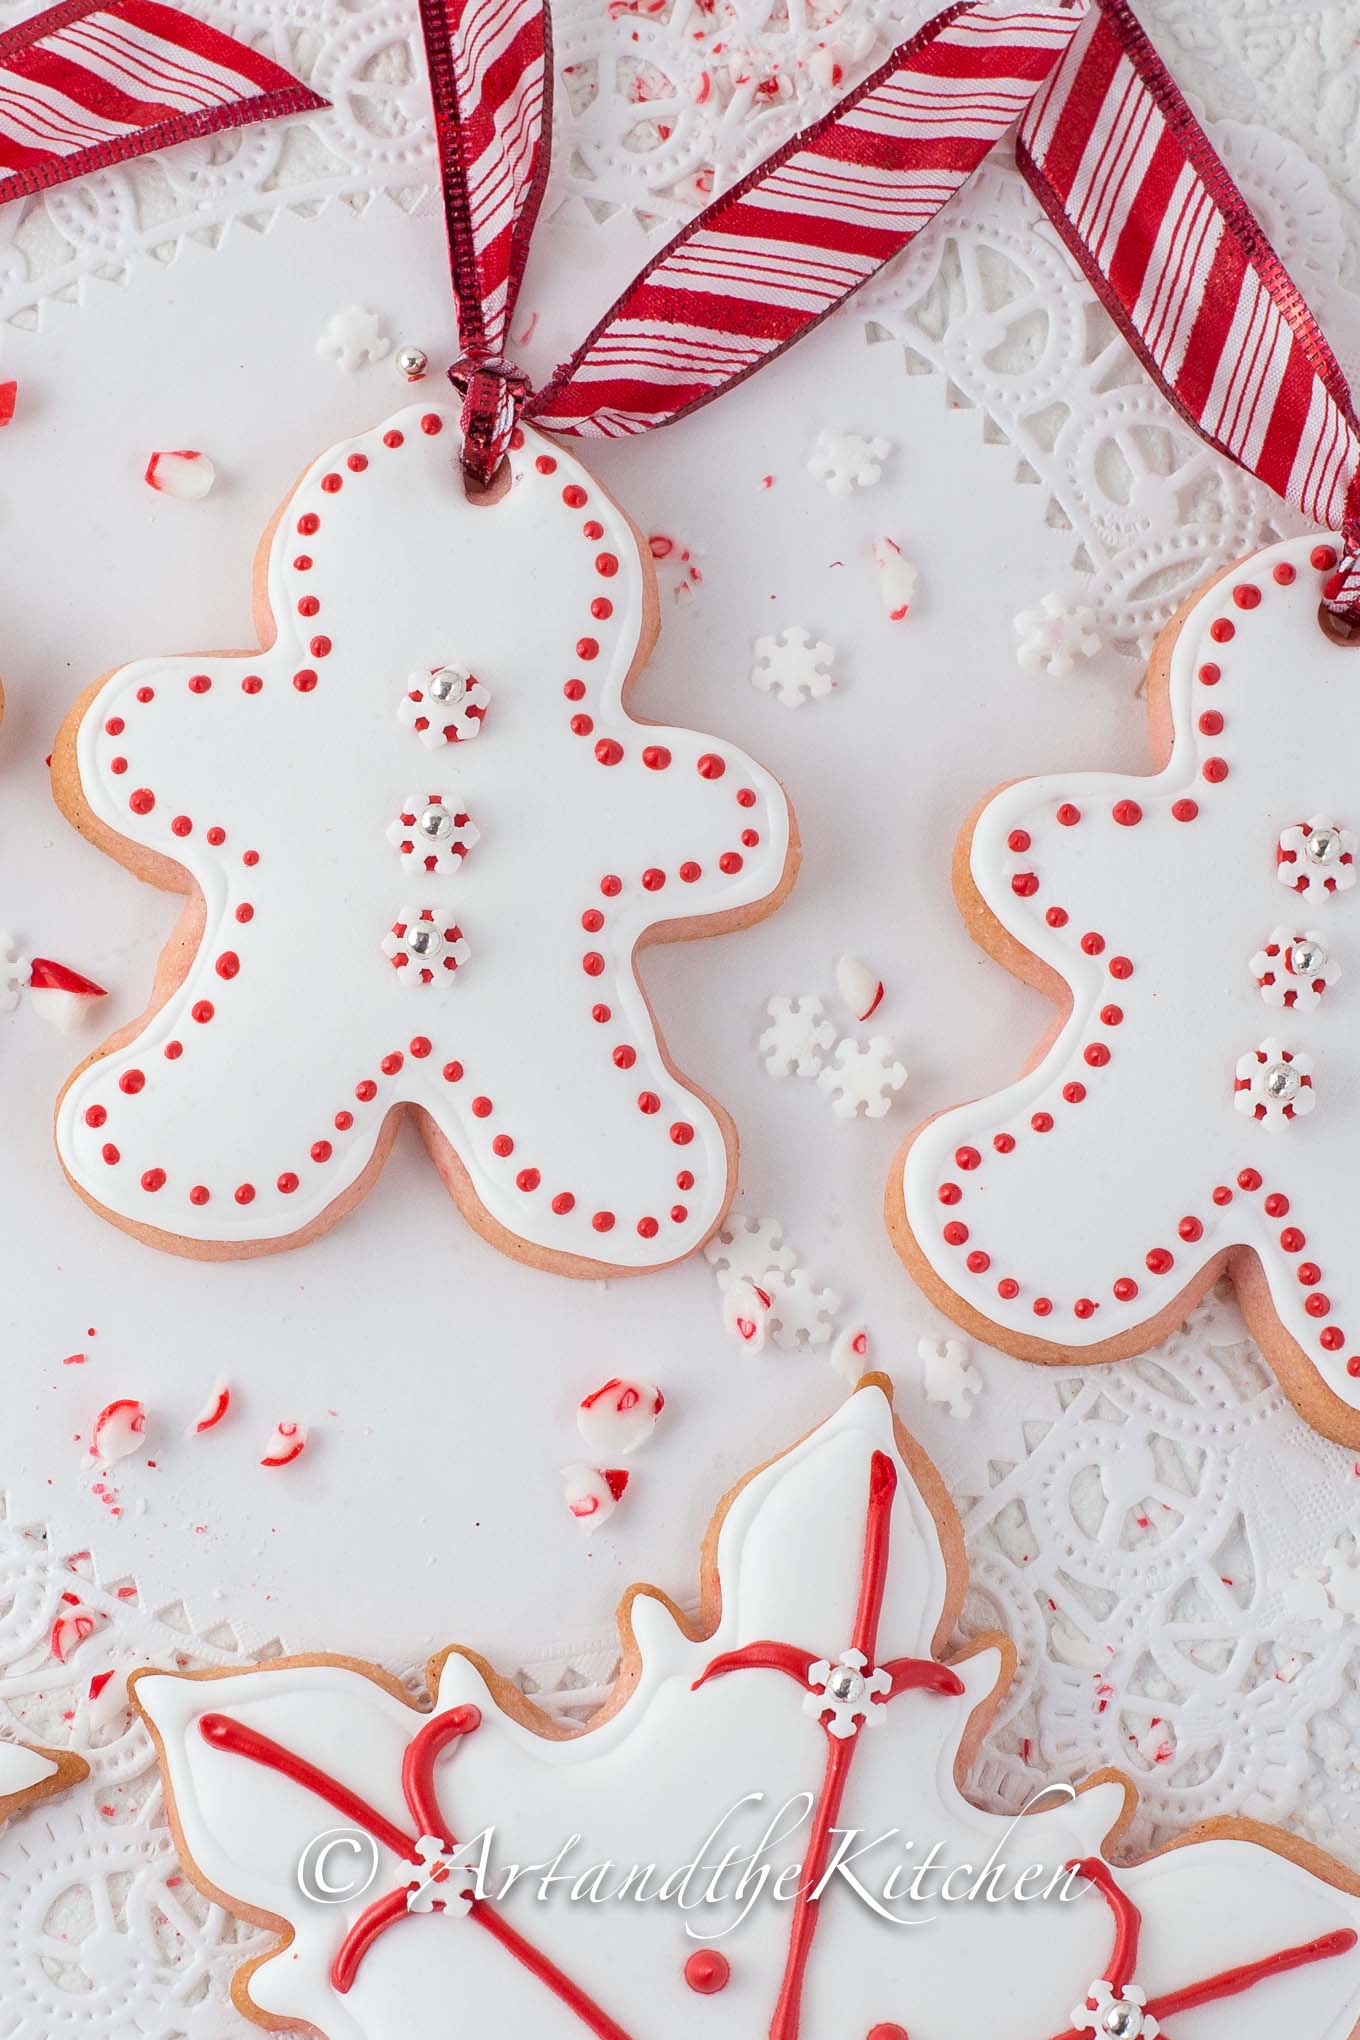 Sugar cookies cut into gingerbread men shapes, coated with white royal icing and decorated with red dots.